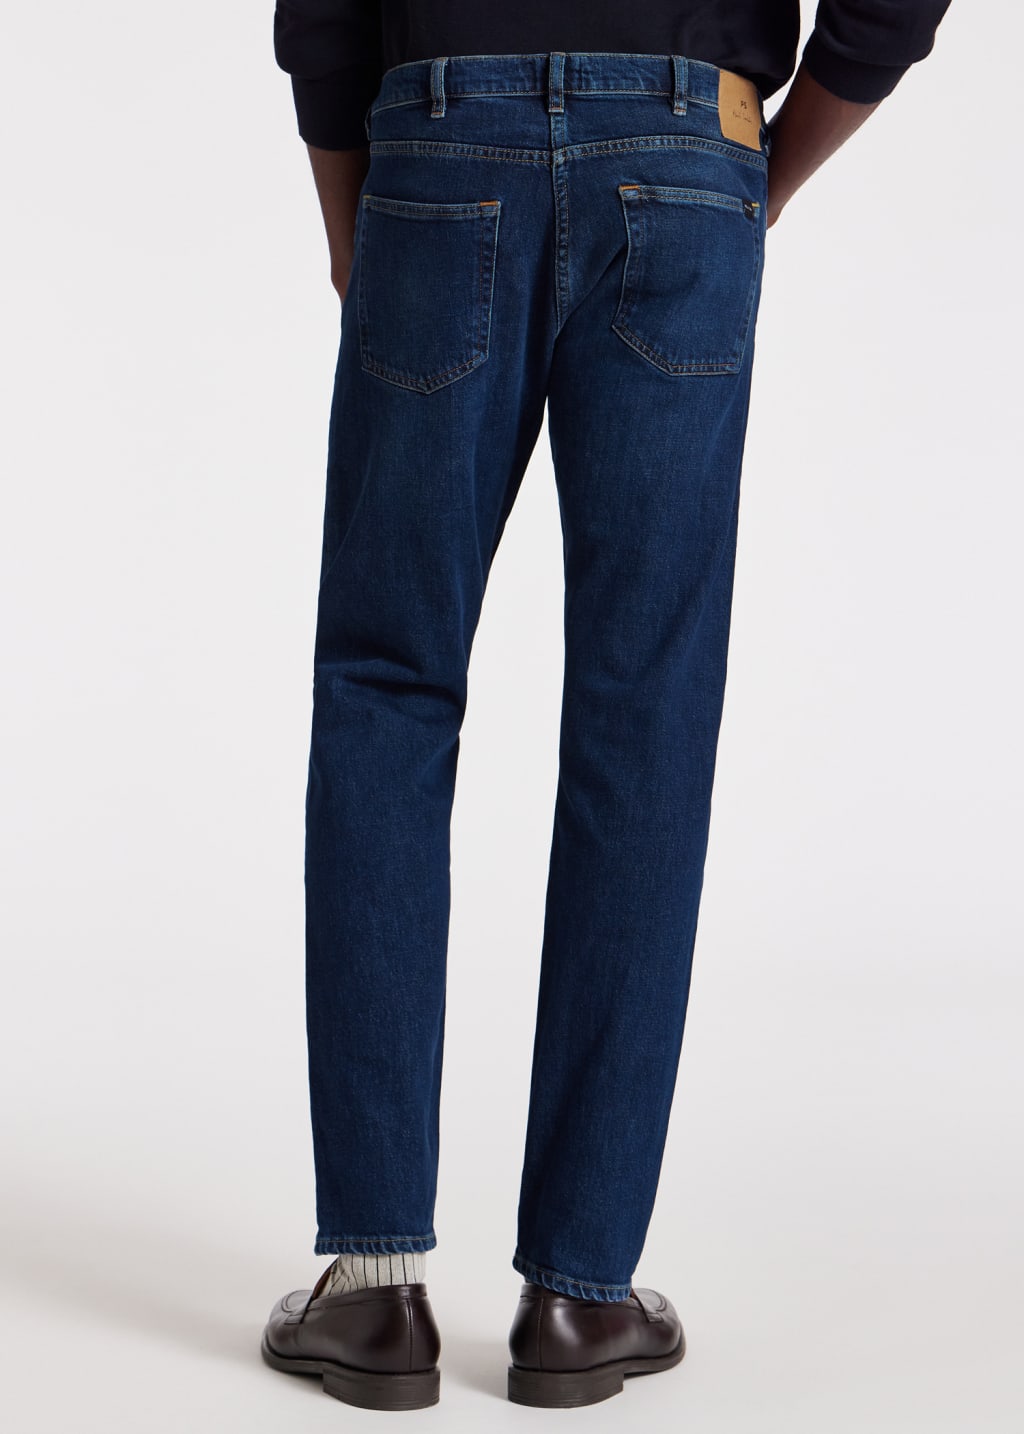 Model View - Tapered-Fit Dark Wash 'Organic Vintage Stretch' Jeans Paul Smith